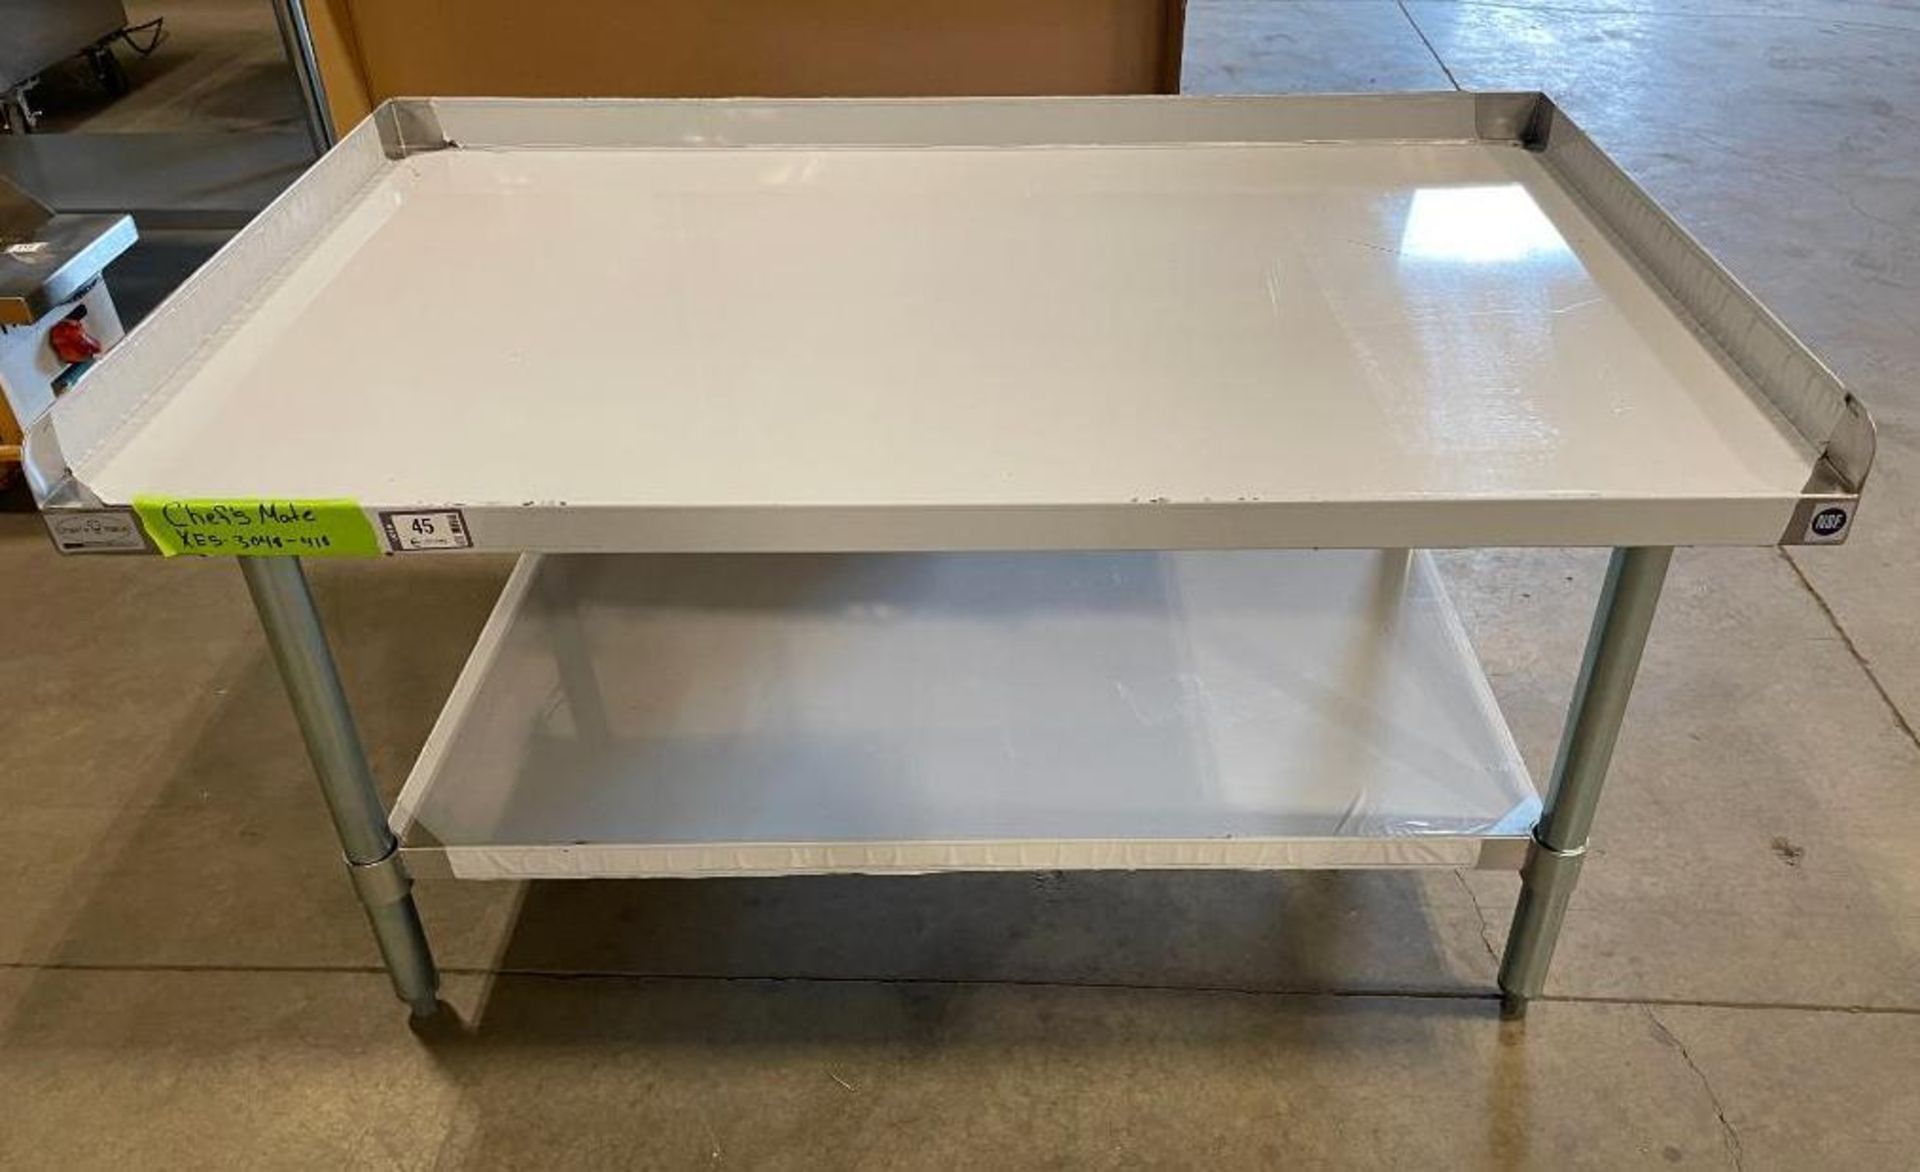 CHEF'S MATE 30" X 48" STAINLESS STEEL EQUIPMENT STAND - NEW